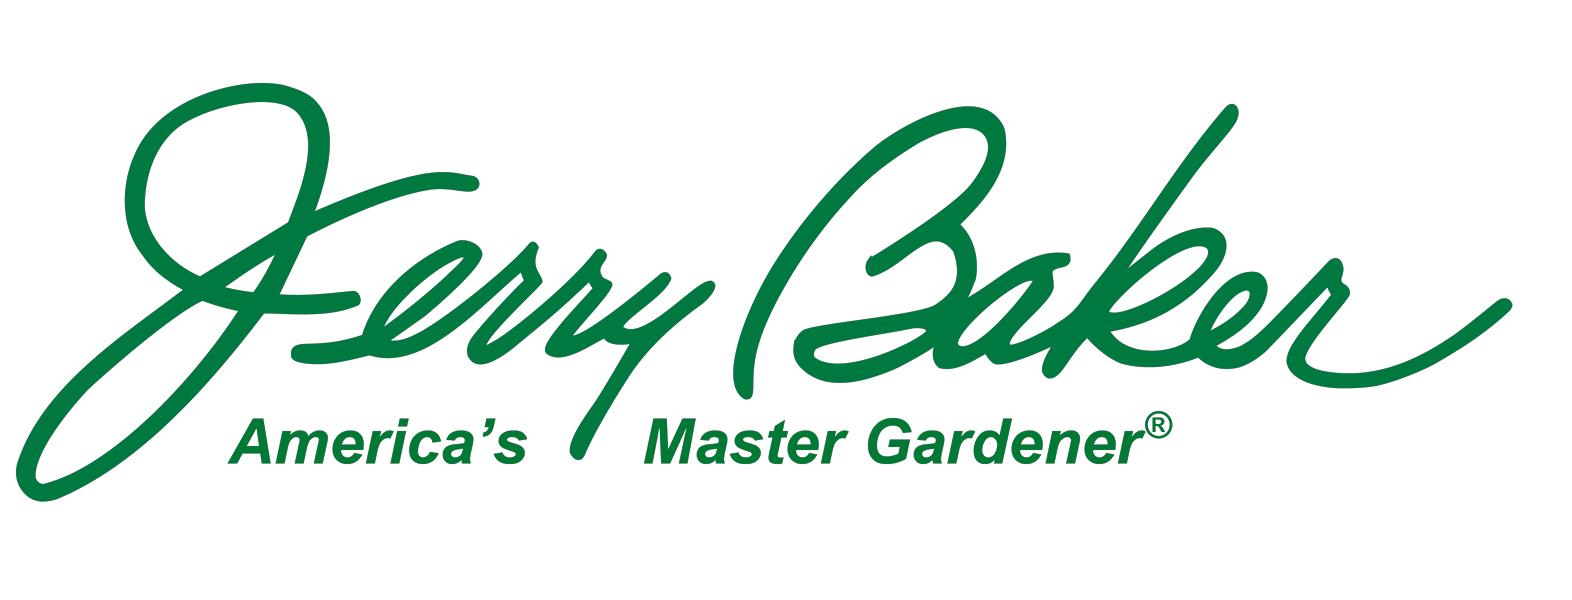 American Master Products logo